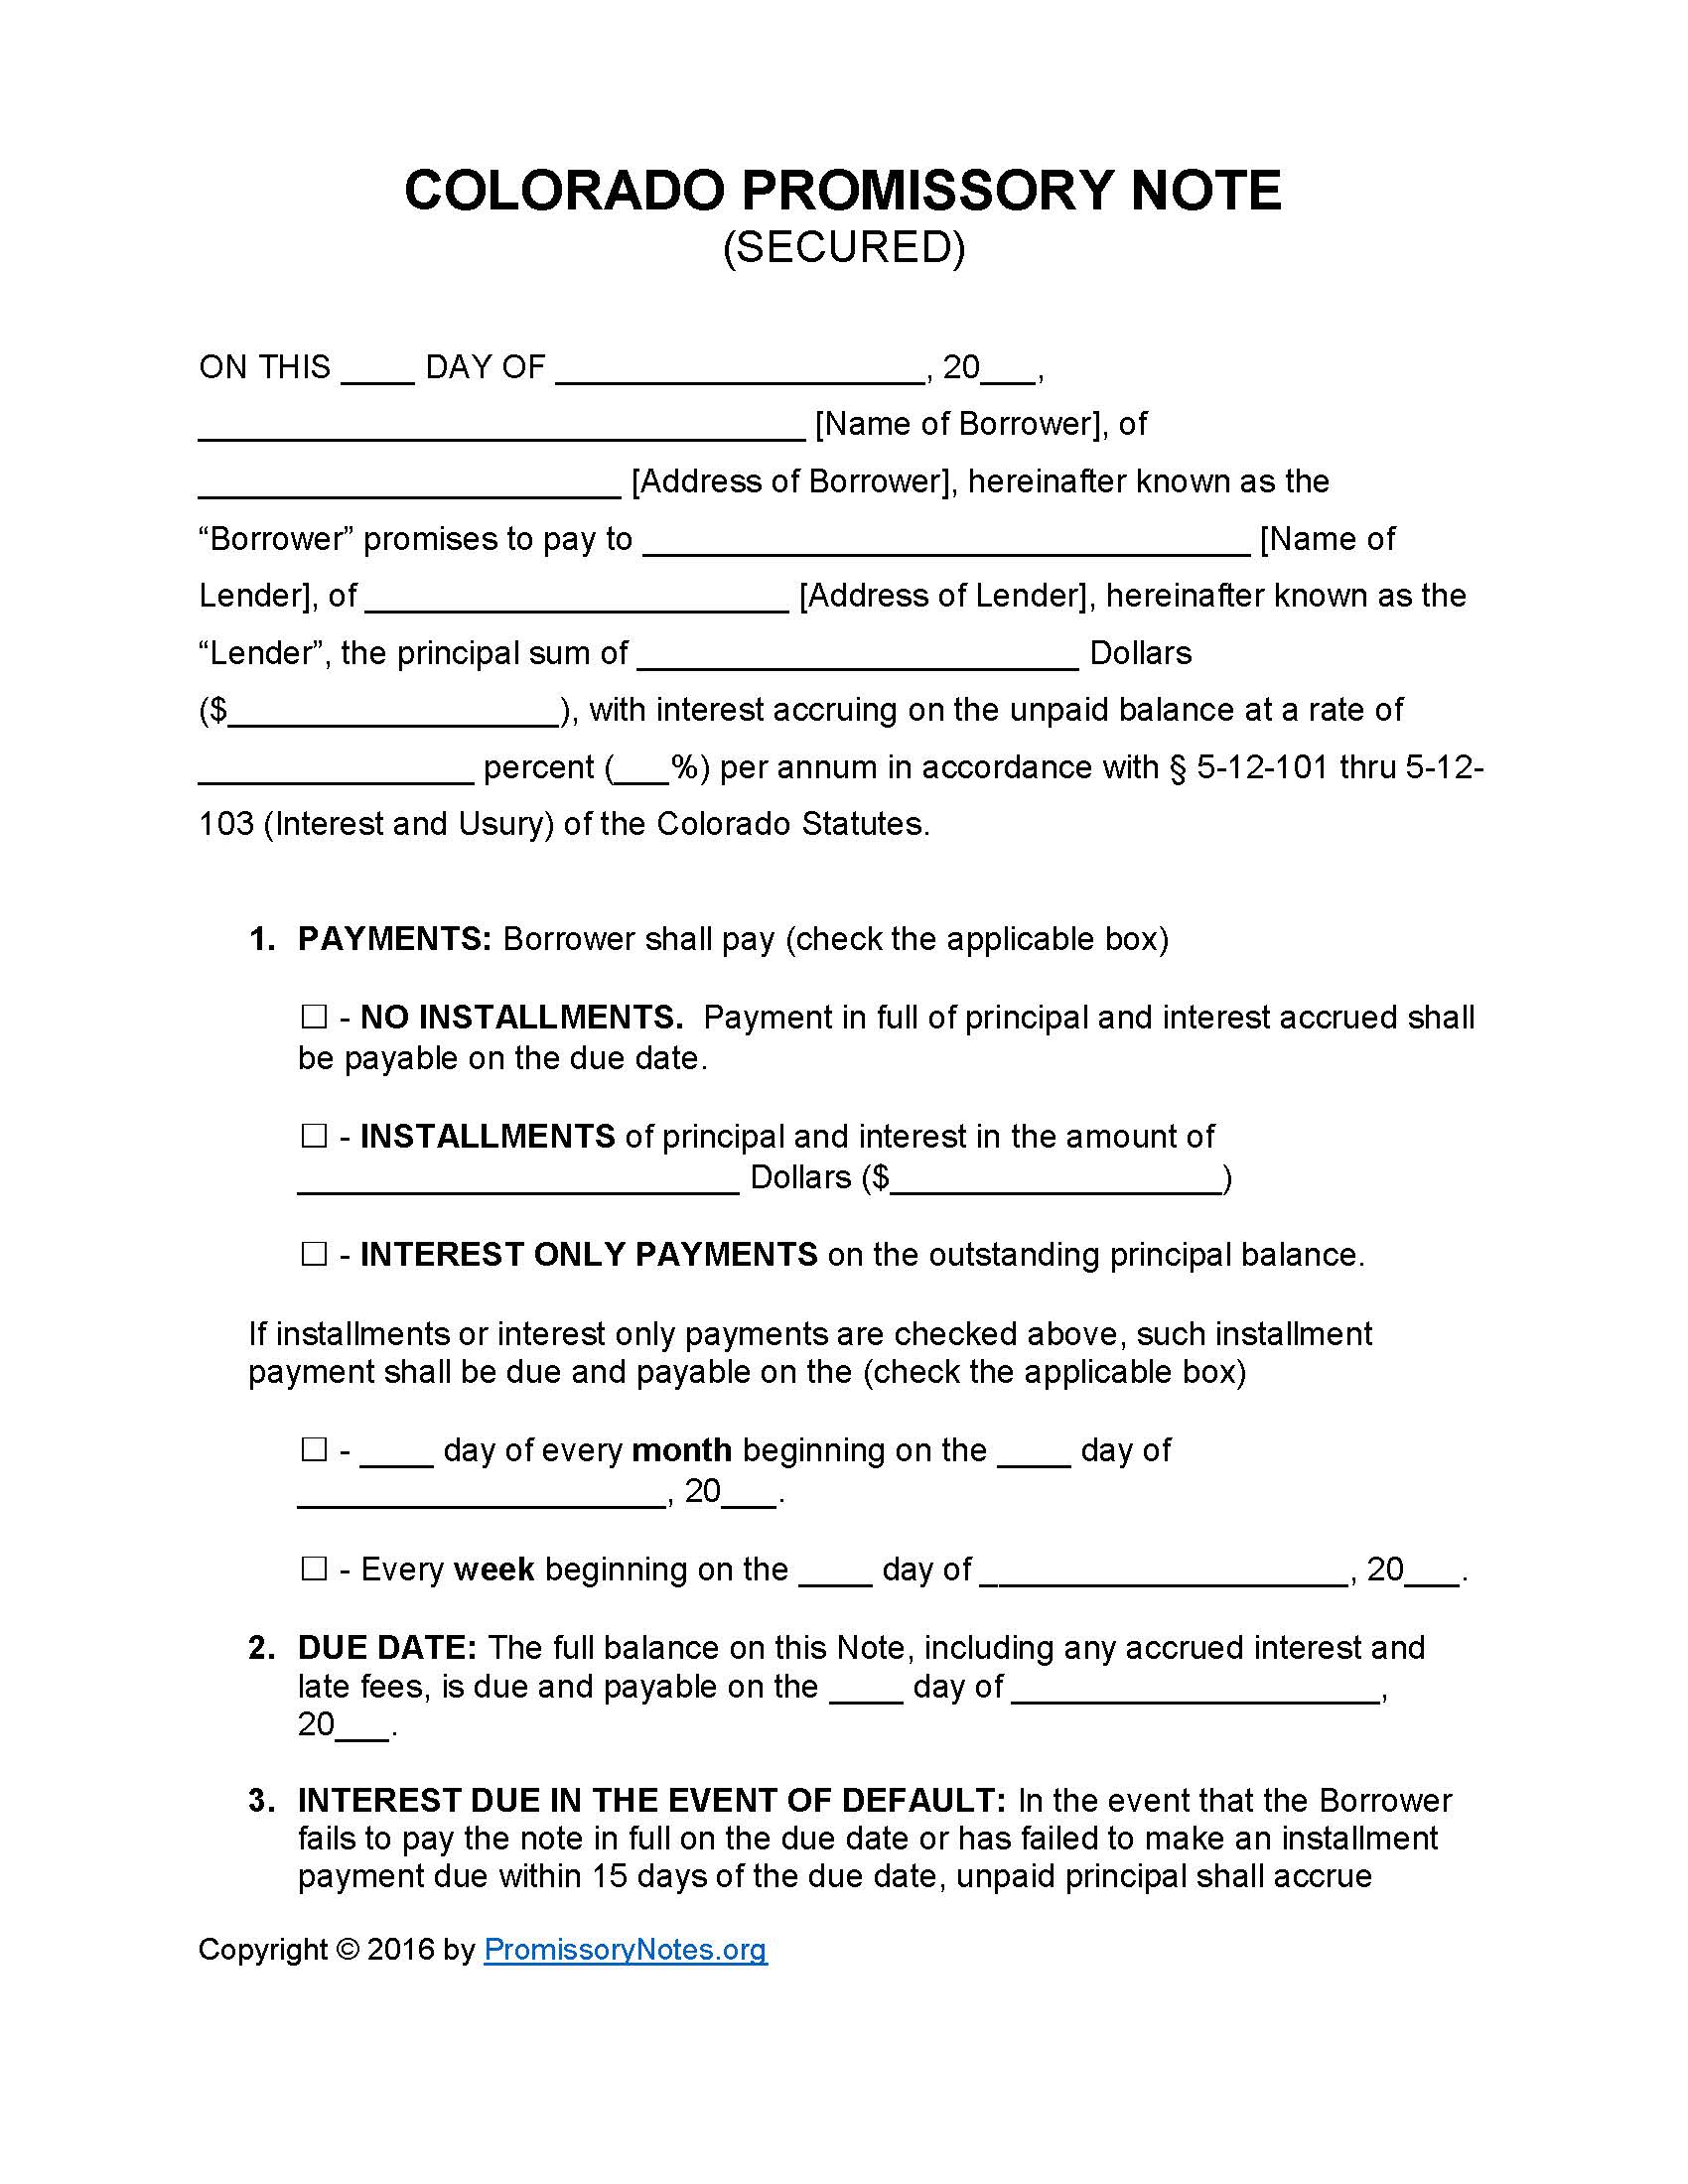 colorado-secured-promissory-note-form